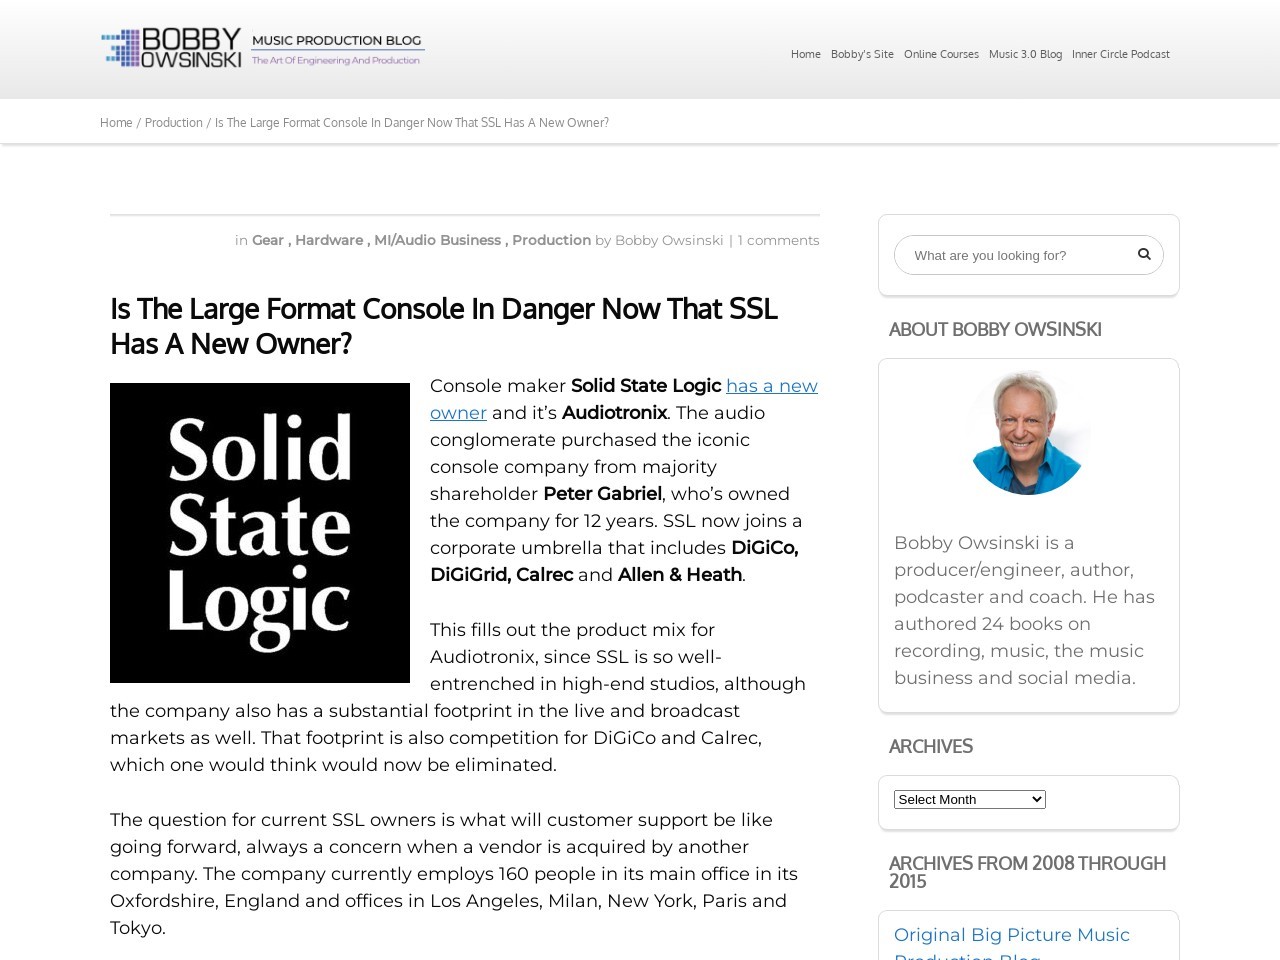 Is The Large Format Console In Danger Now That SSL Has A New Owner? - Bobby Owsinski's Music Production Blog